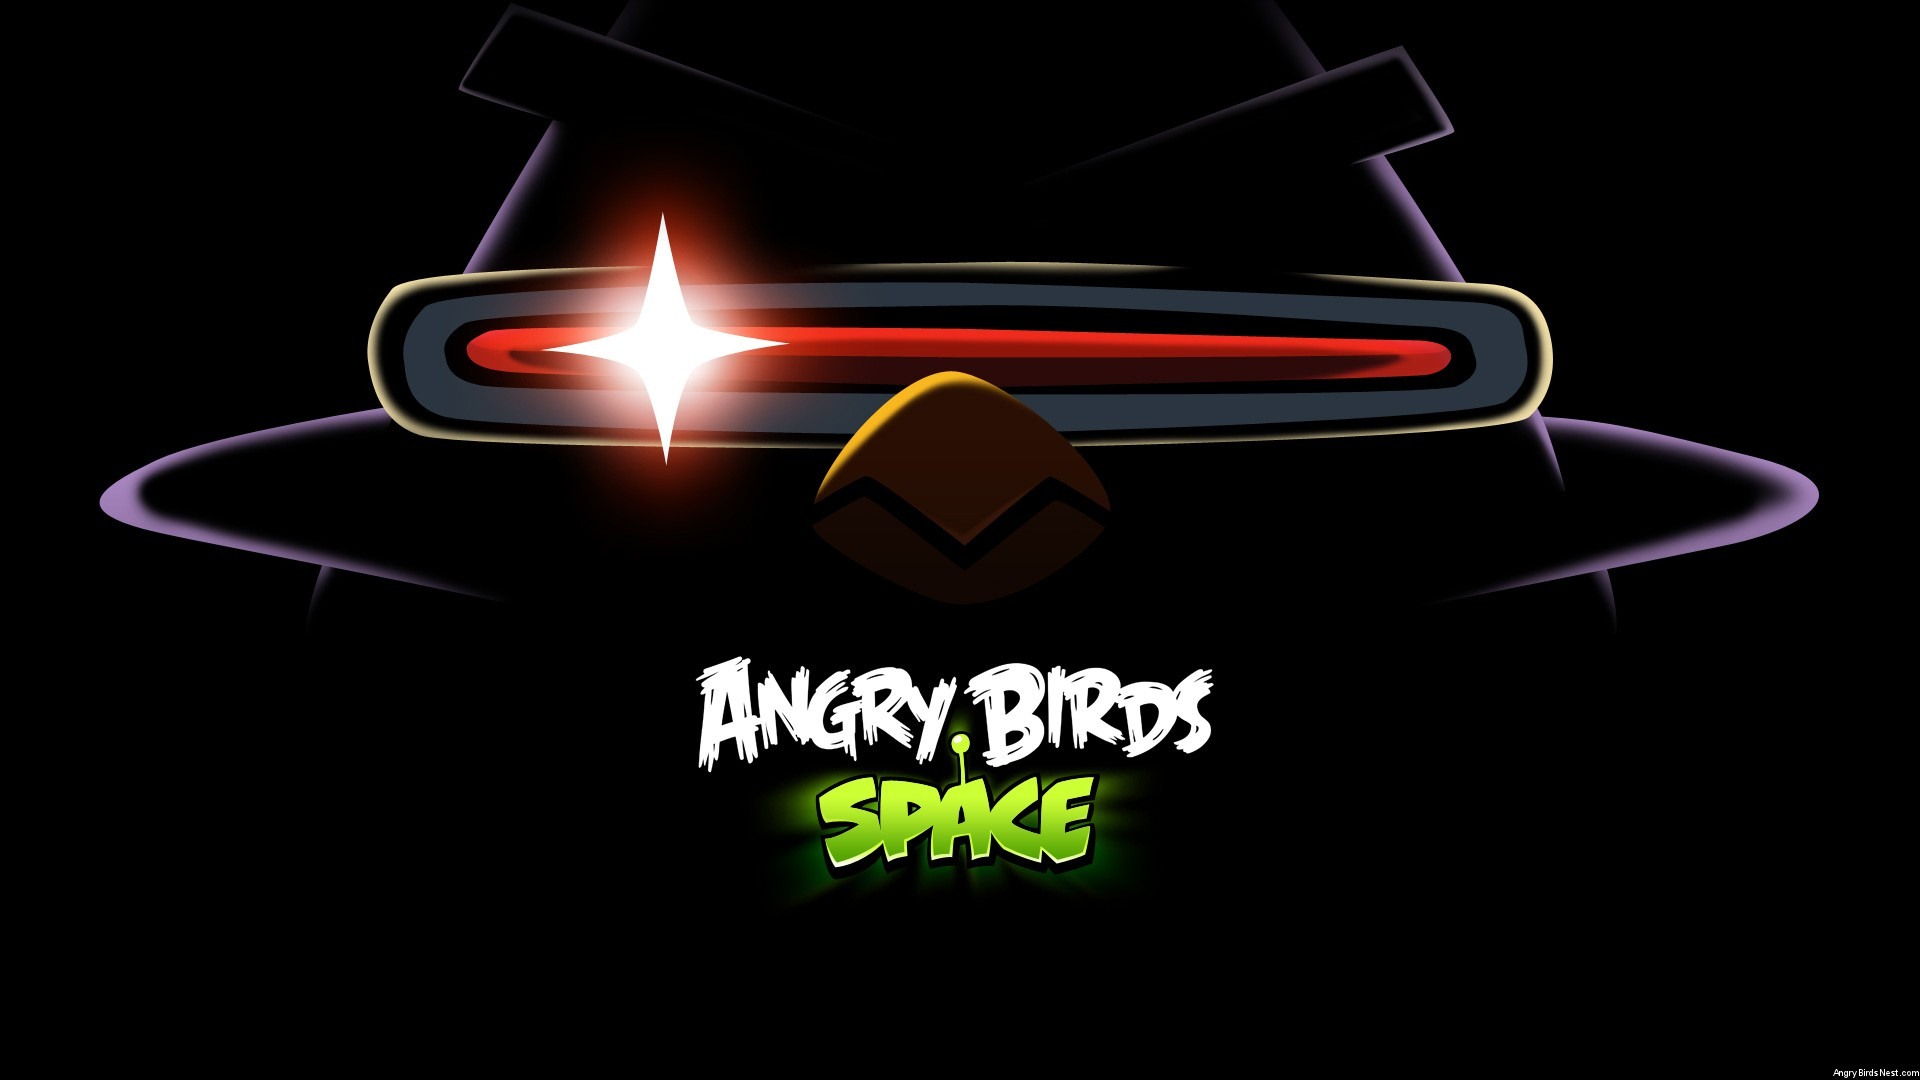 Angry Birds Spiel wallpapers #22 - 1920x1080